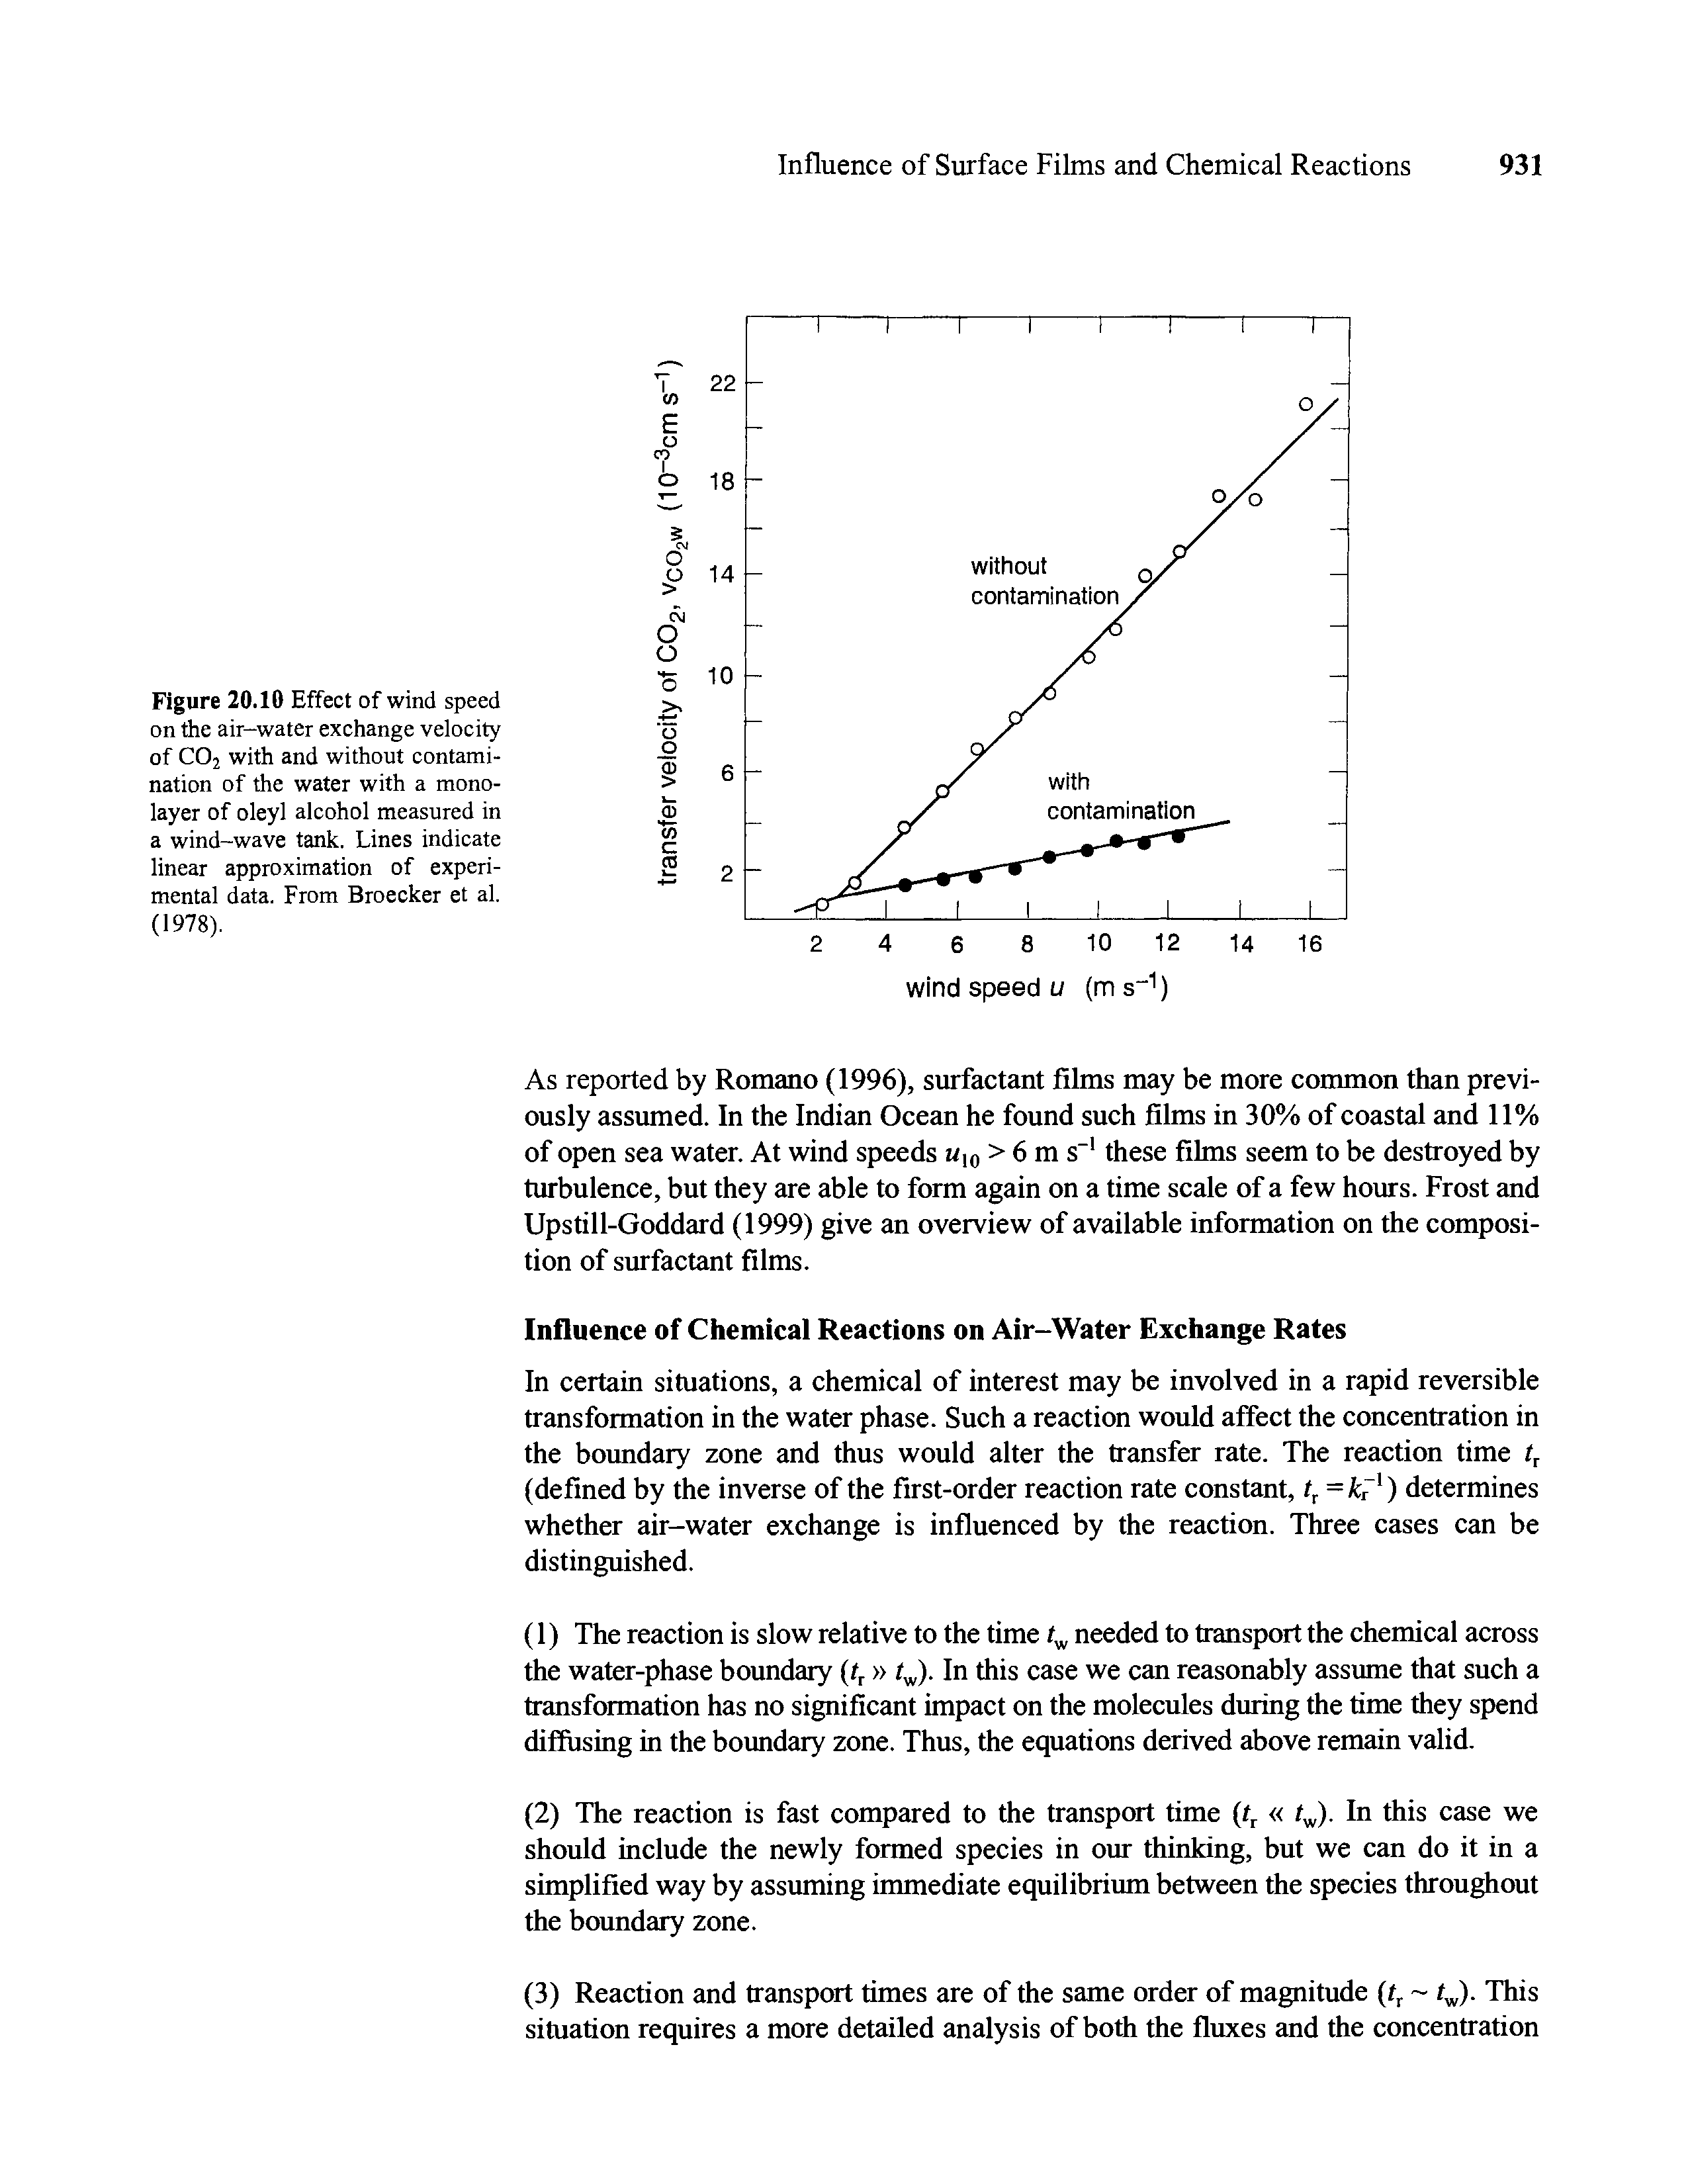 Figure 20.10 Effect of wind speed on the air-water exchange velocity of C02 with and without contamination of the water with a mono-layer of oleyl alcohol measured in a wind-wave tank. Lines indicate linear approximation of experimental data. From Broecker et al. (1978).